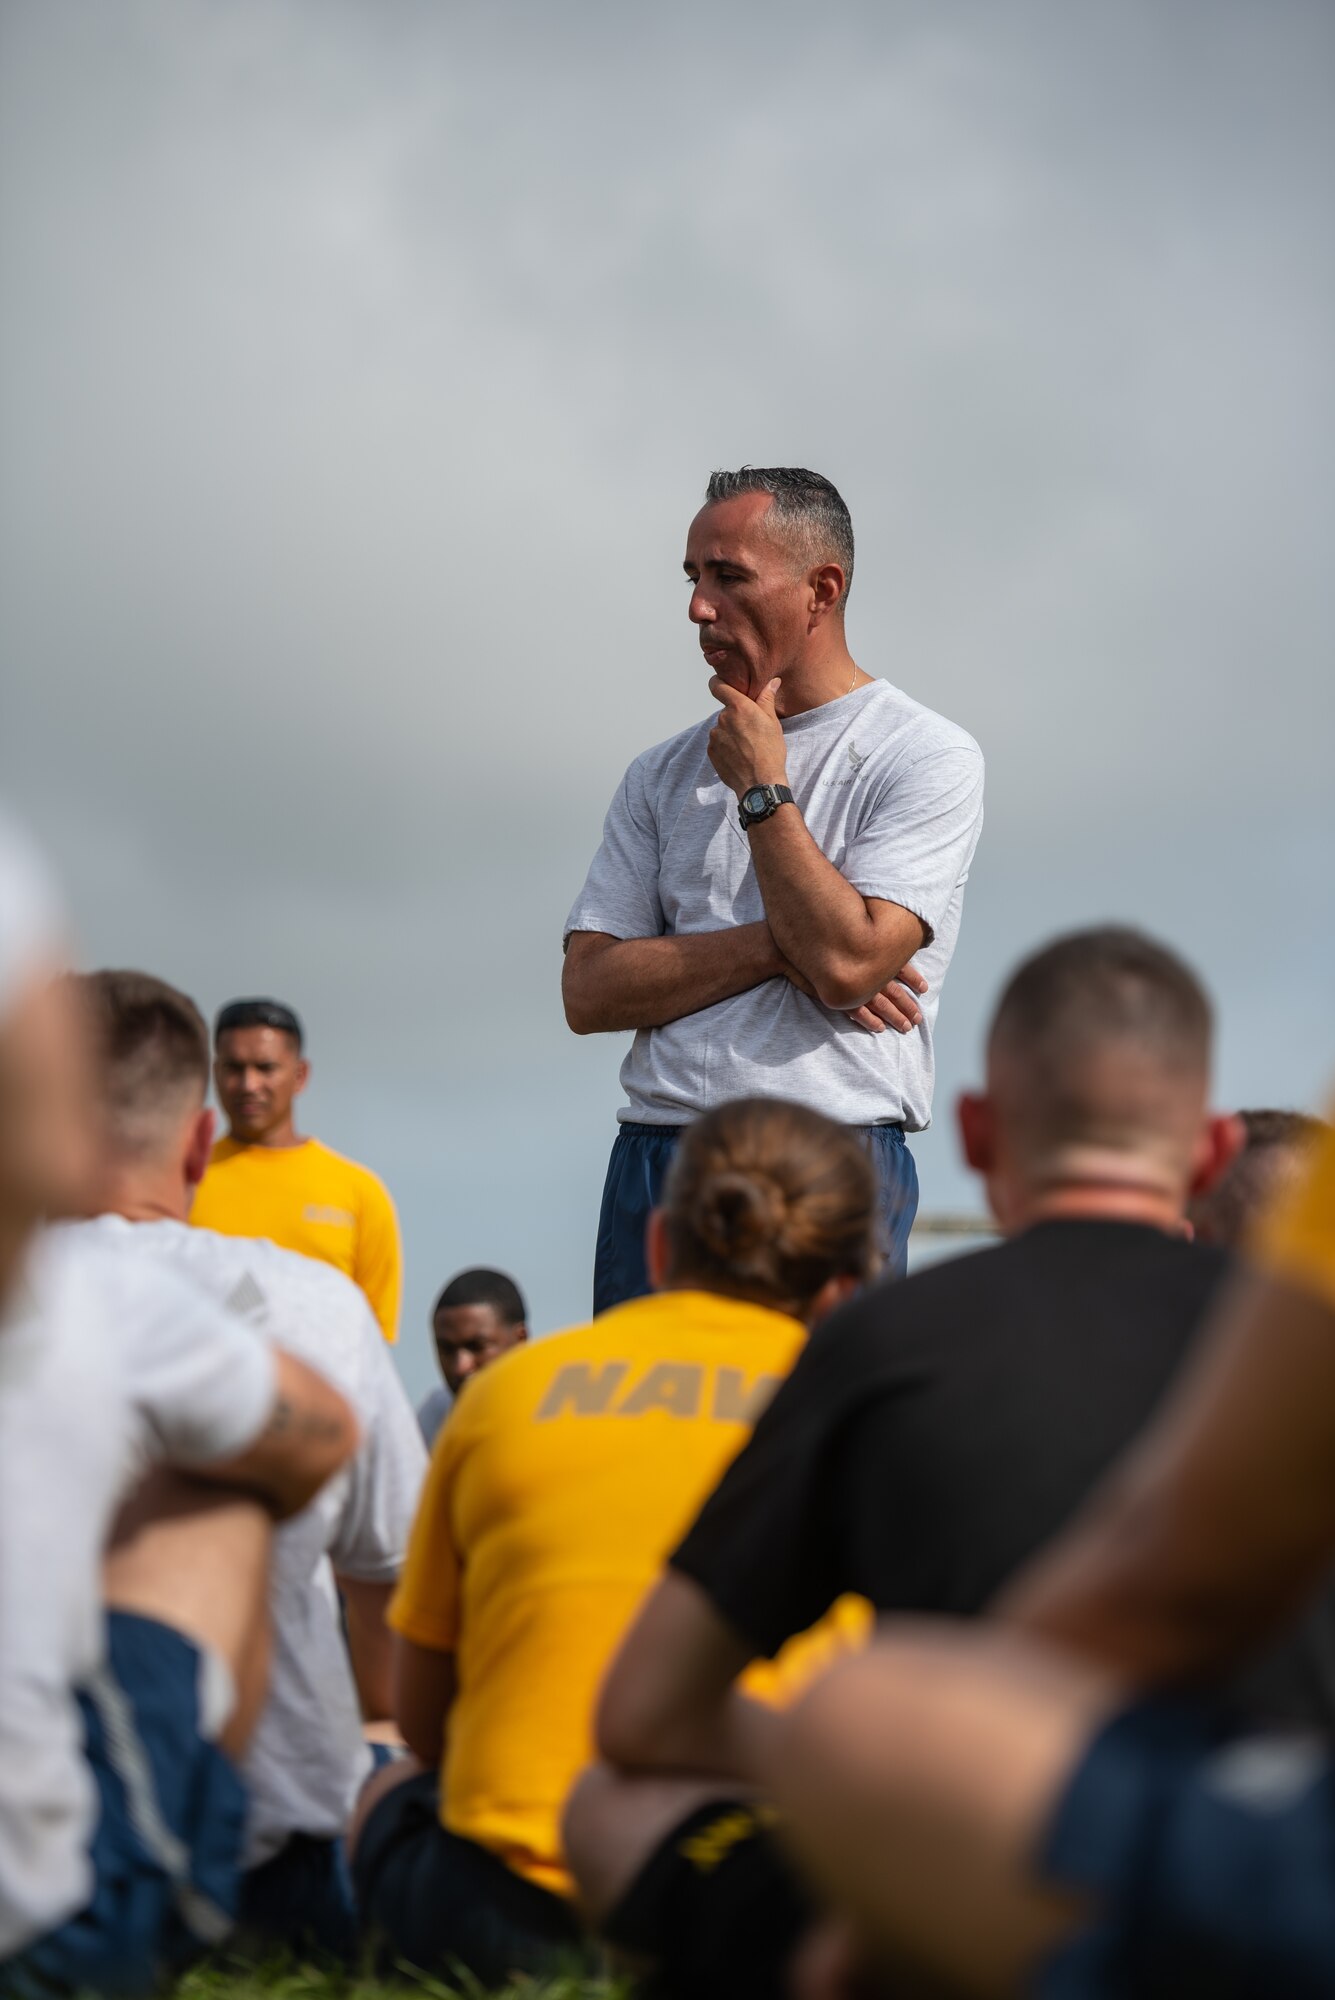 U.S. Air Force Chief Master Sgt. Heriberto Diaz Jr., Erwin Professional Military Education Center commandant, gives U.S. Soldiers, Sailors, Marines and Airmen a motivational speech after the Okinawa Joint Fitness Challenge Sept. 26, 2018, at Kadena Air Base, Japan. The OJFC was a portion of the OJE that enabled students to bond while overcoming obstacles and challenges faced in the battlefield. (U.S. Air Force photo by Staff Sgt. Micaiah Anthony)